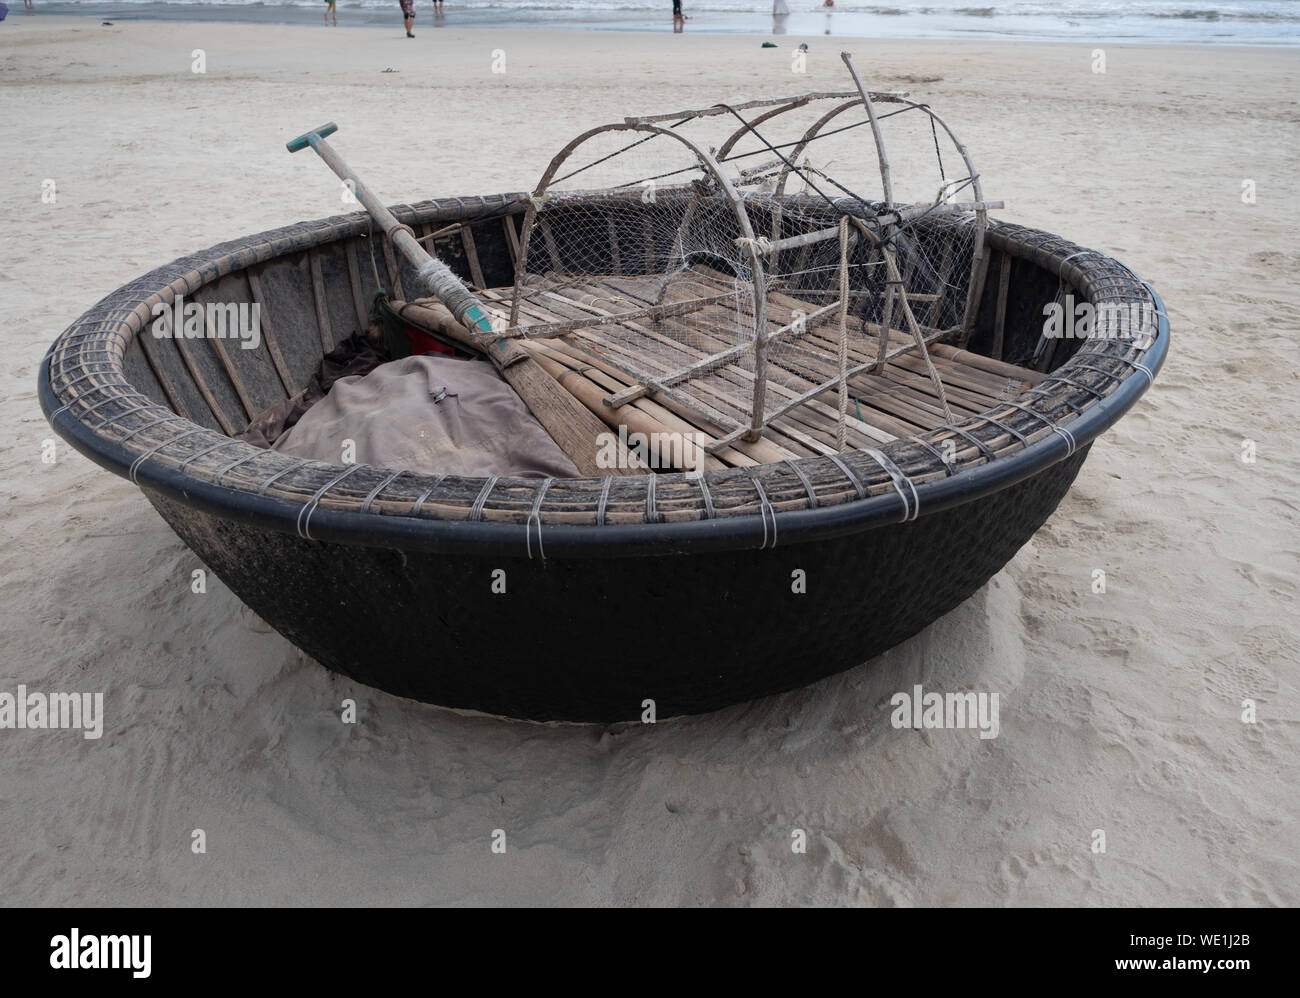 Close up of a Vietnamese fishing basket boat with oar and net trap on the beach in Danang. Stock Photo